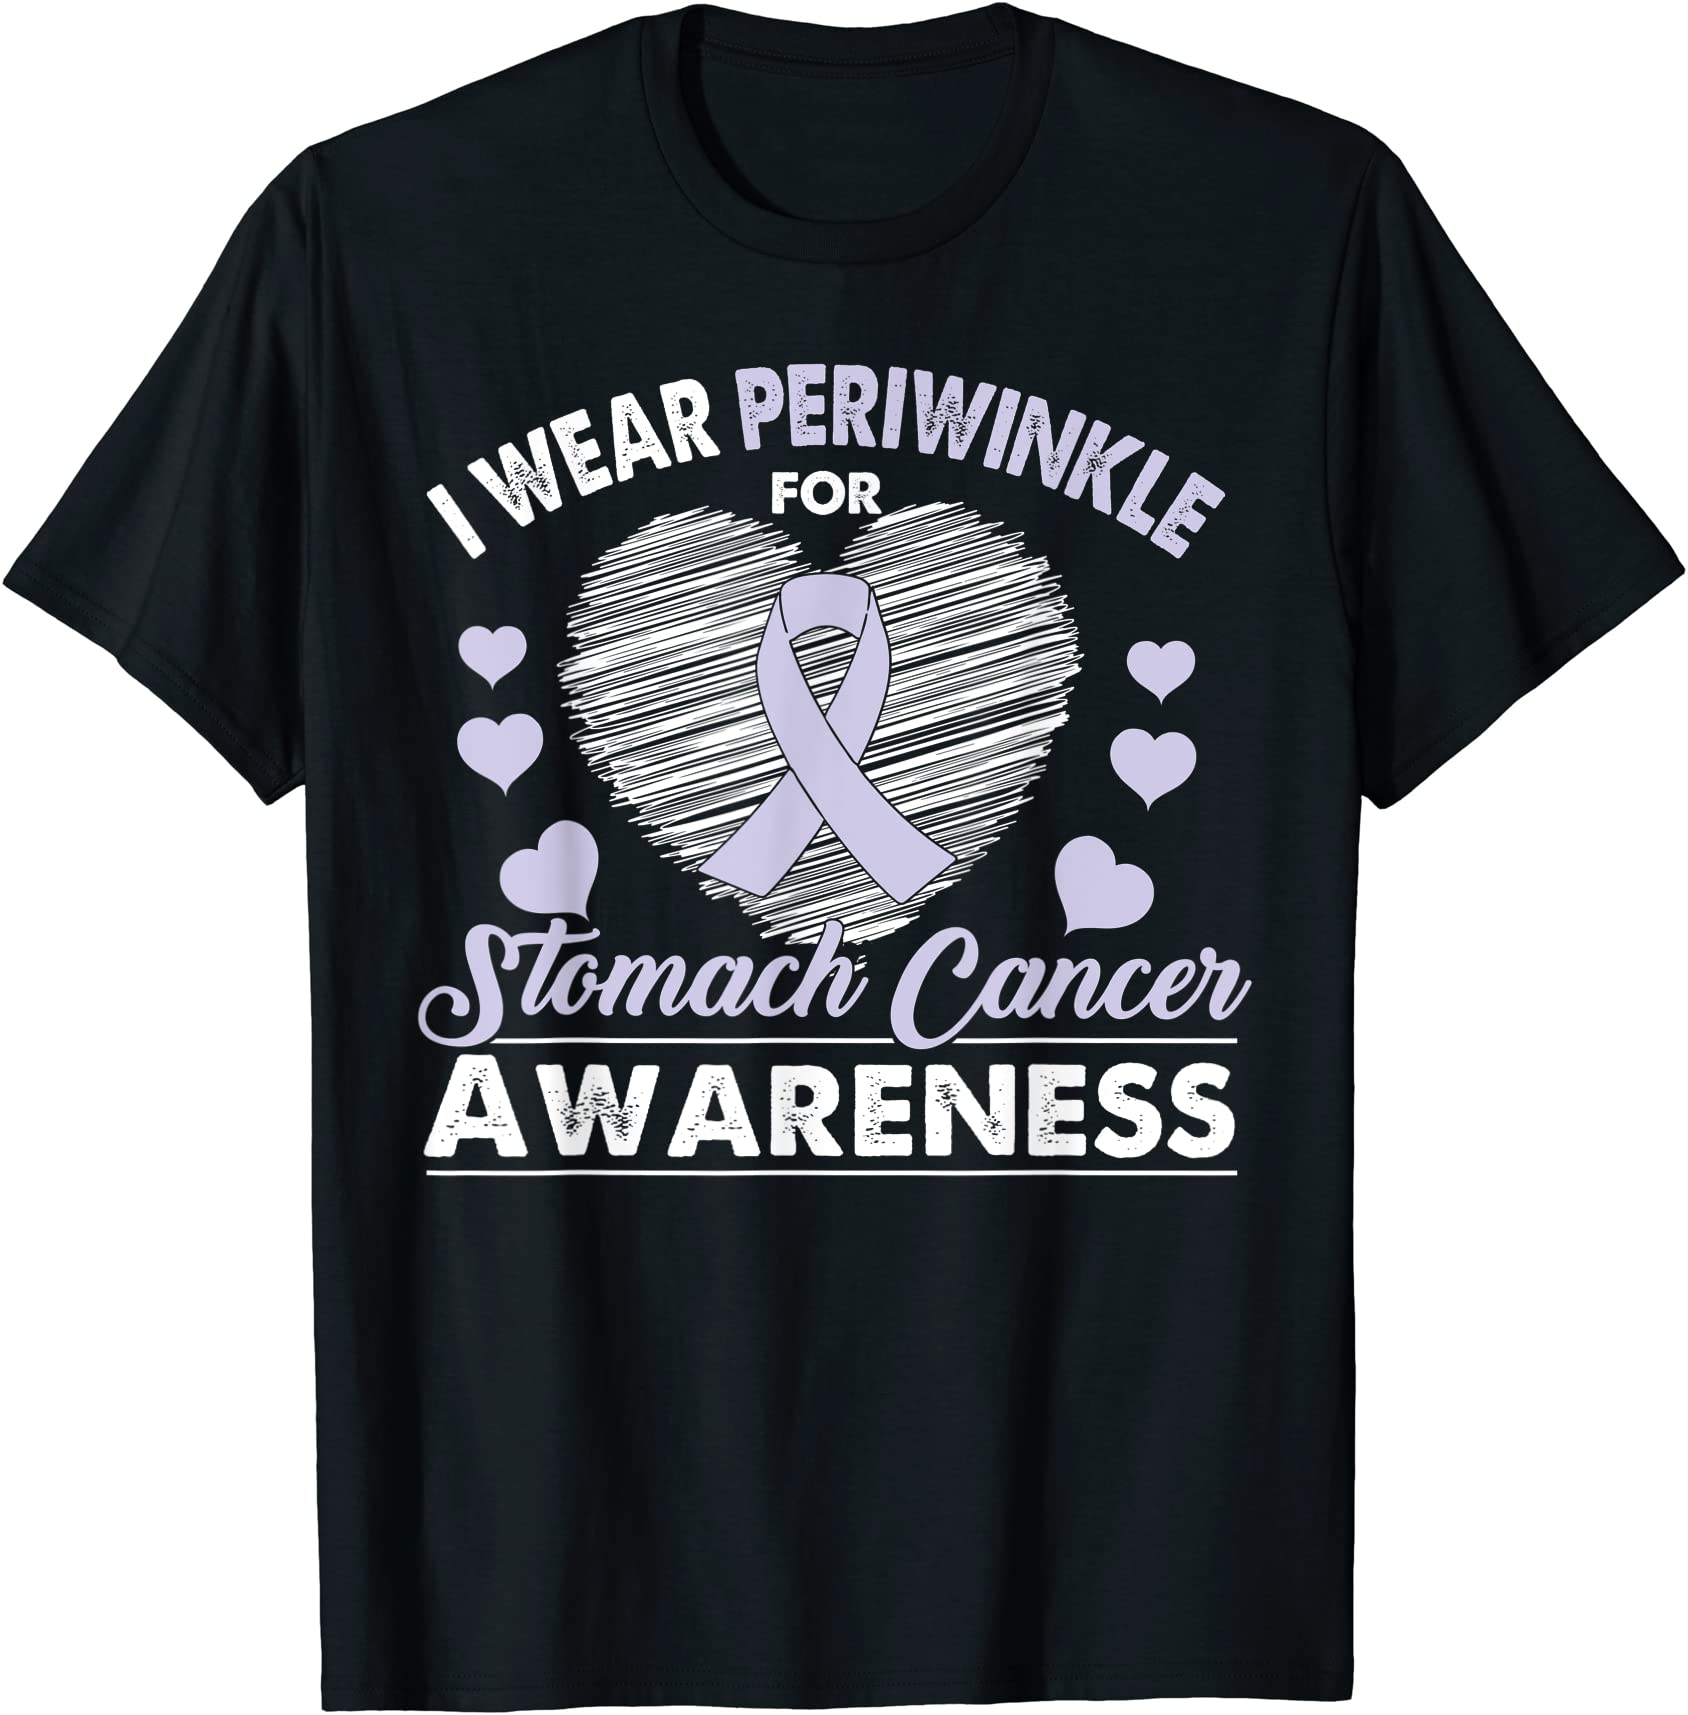 i wear periwinkle stomach cancer awareness ribbon t shirt men - Buy t ...